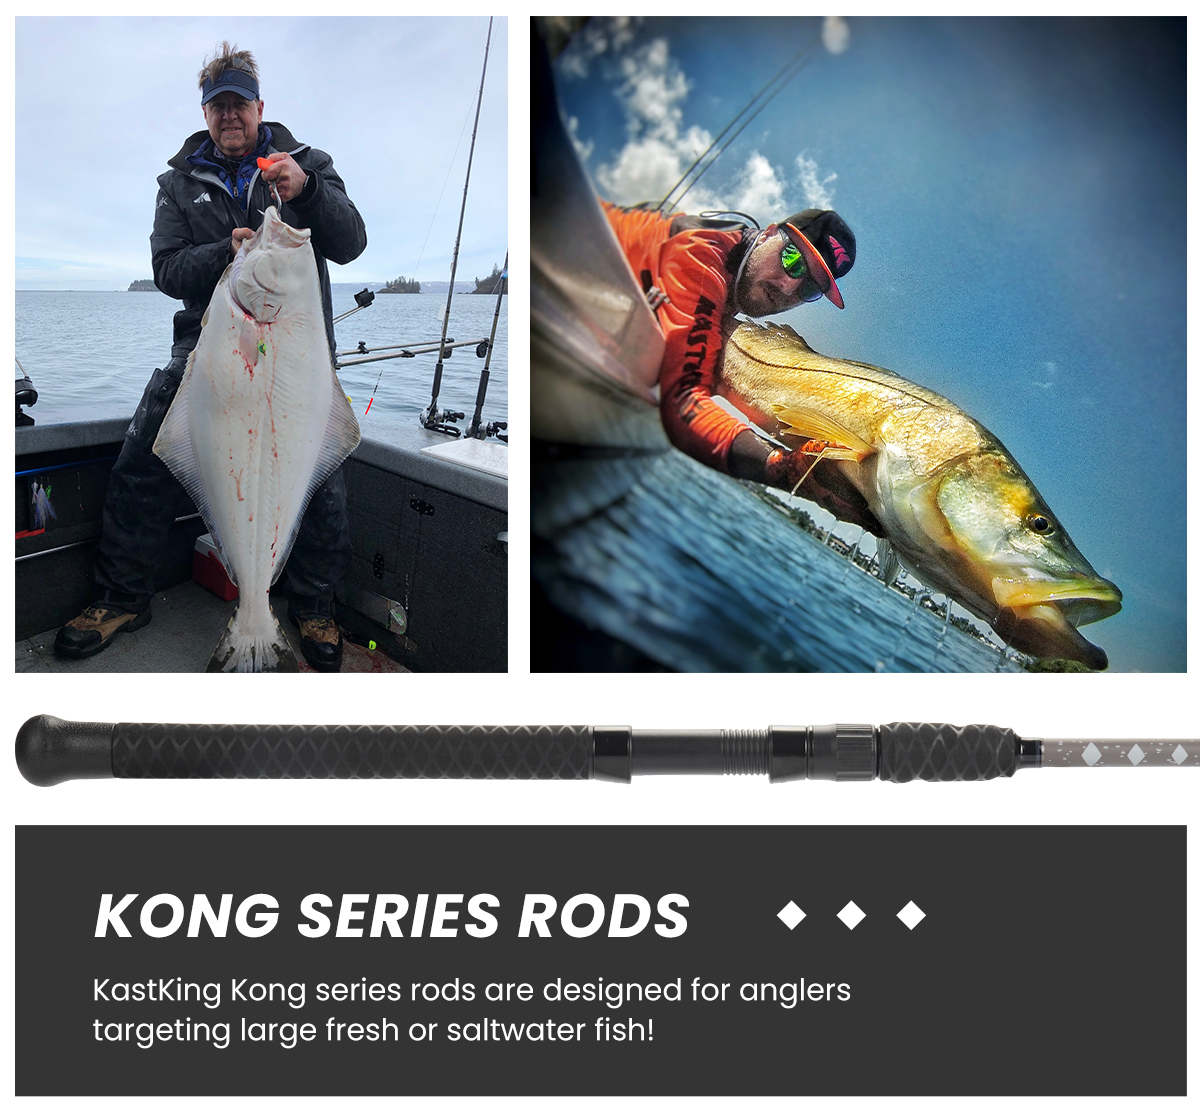 Purchase any Kong rod and receive a free 300 yard spool of Destron Braided  Line - a $14.99 Value! - KastKing